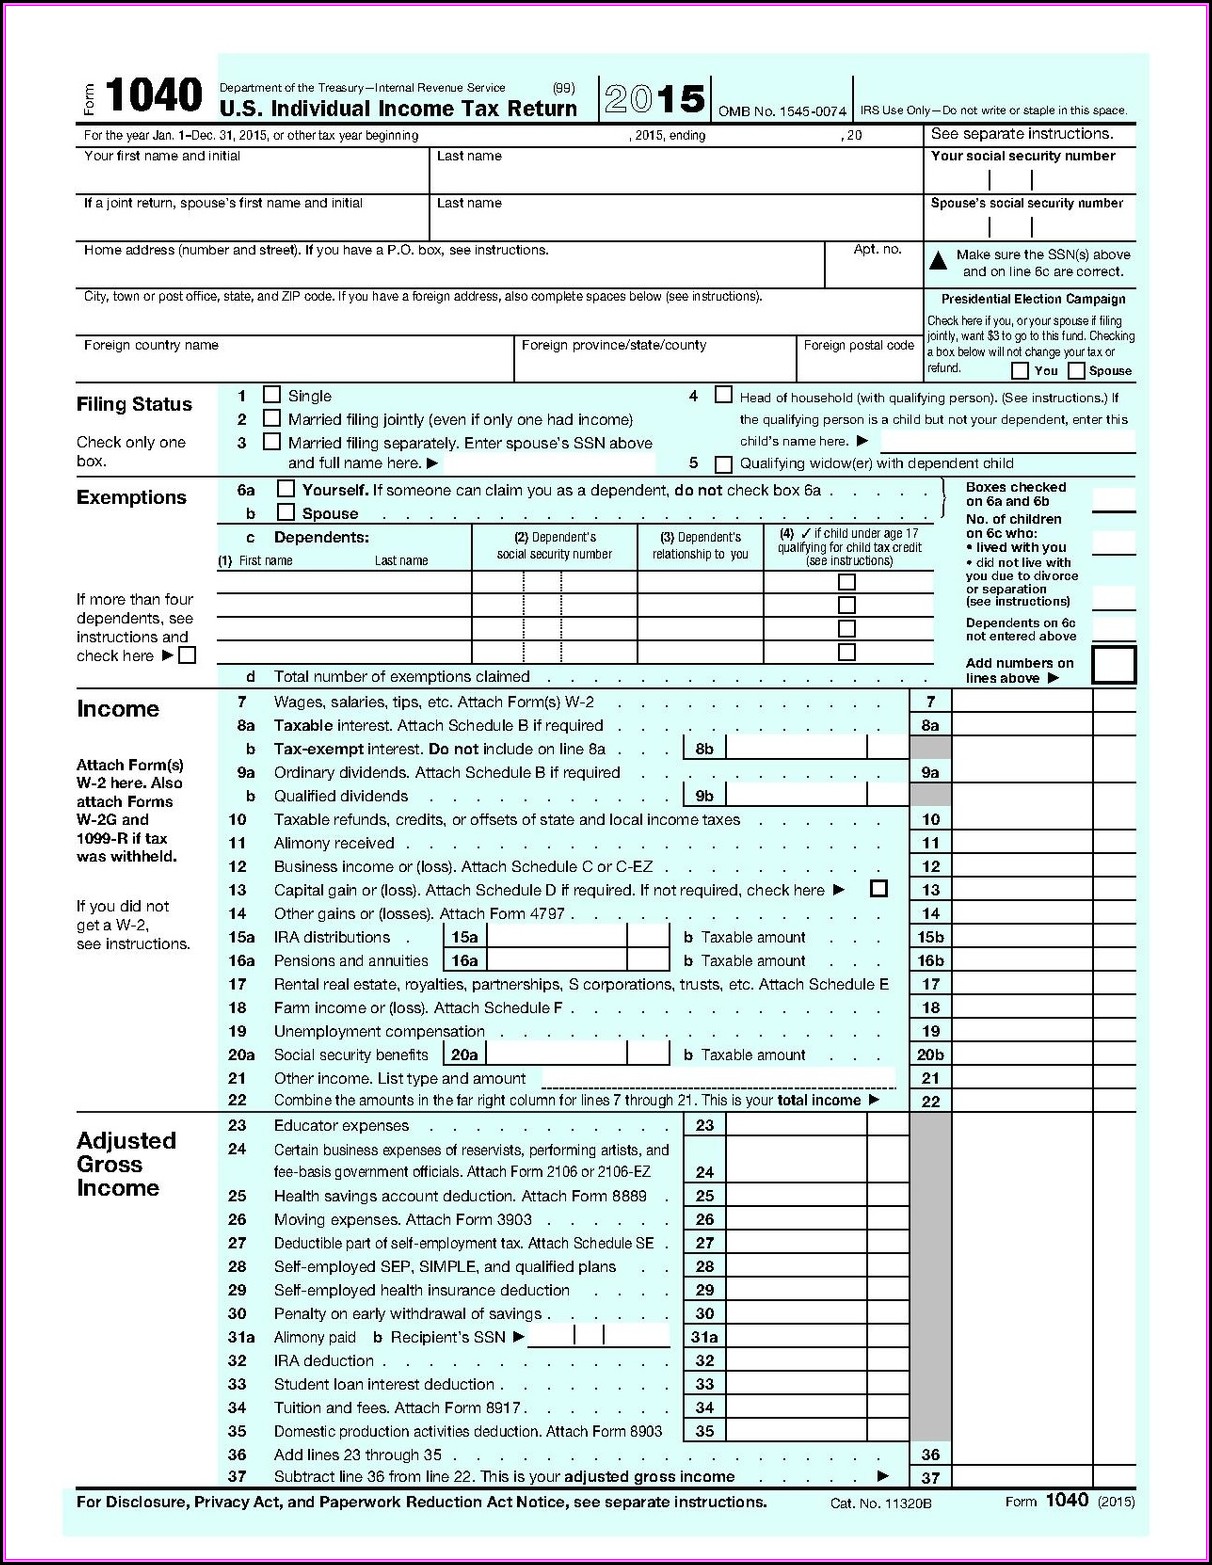 Federal Income Tax Forms 1040 V